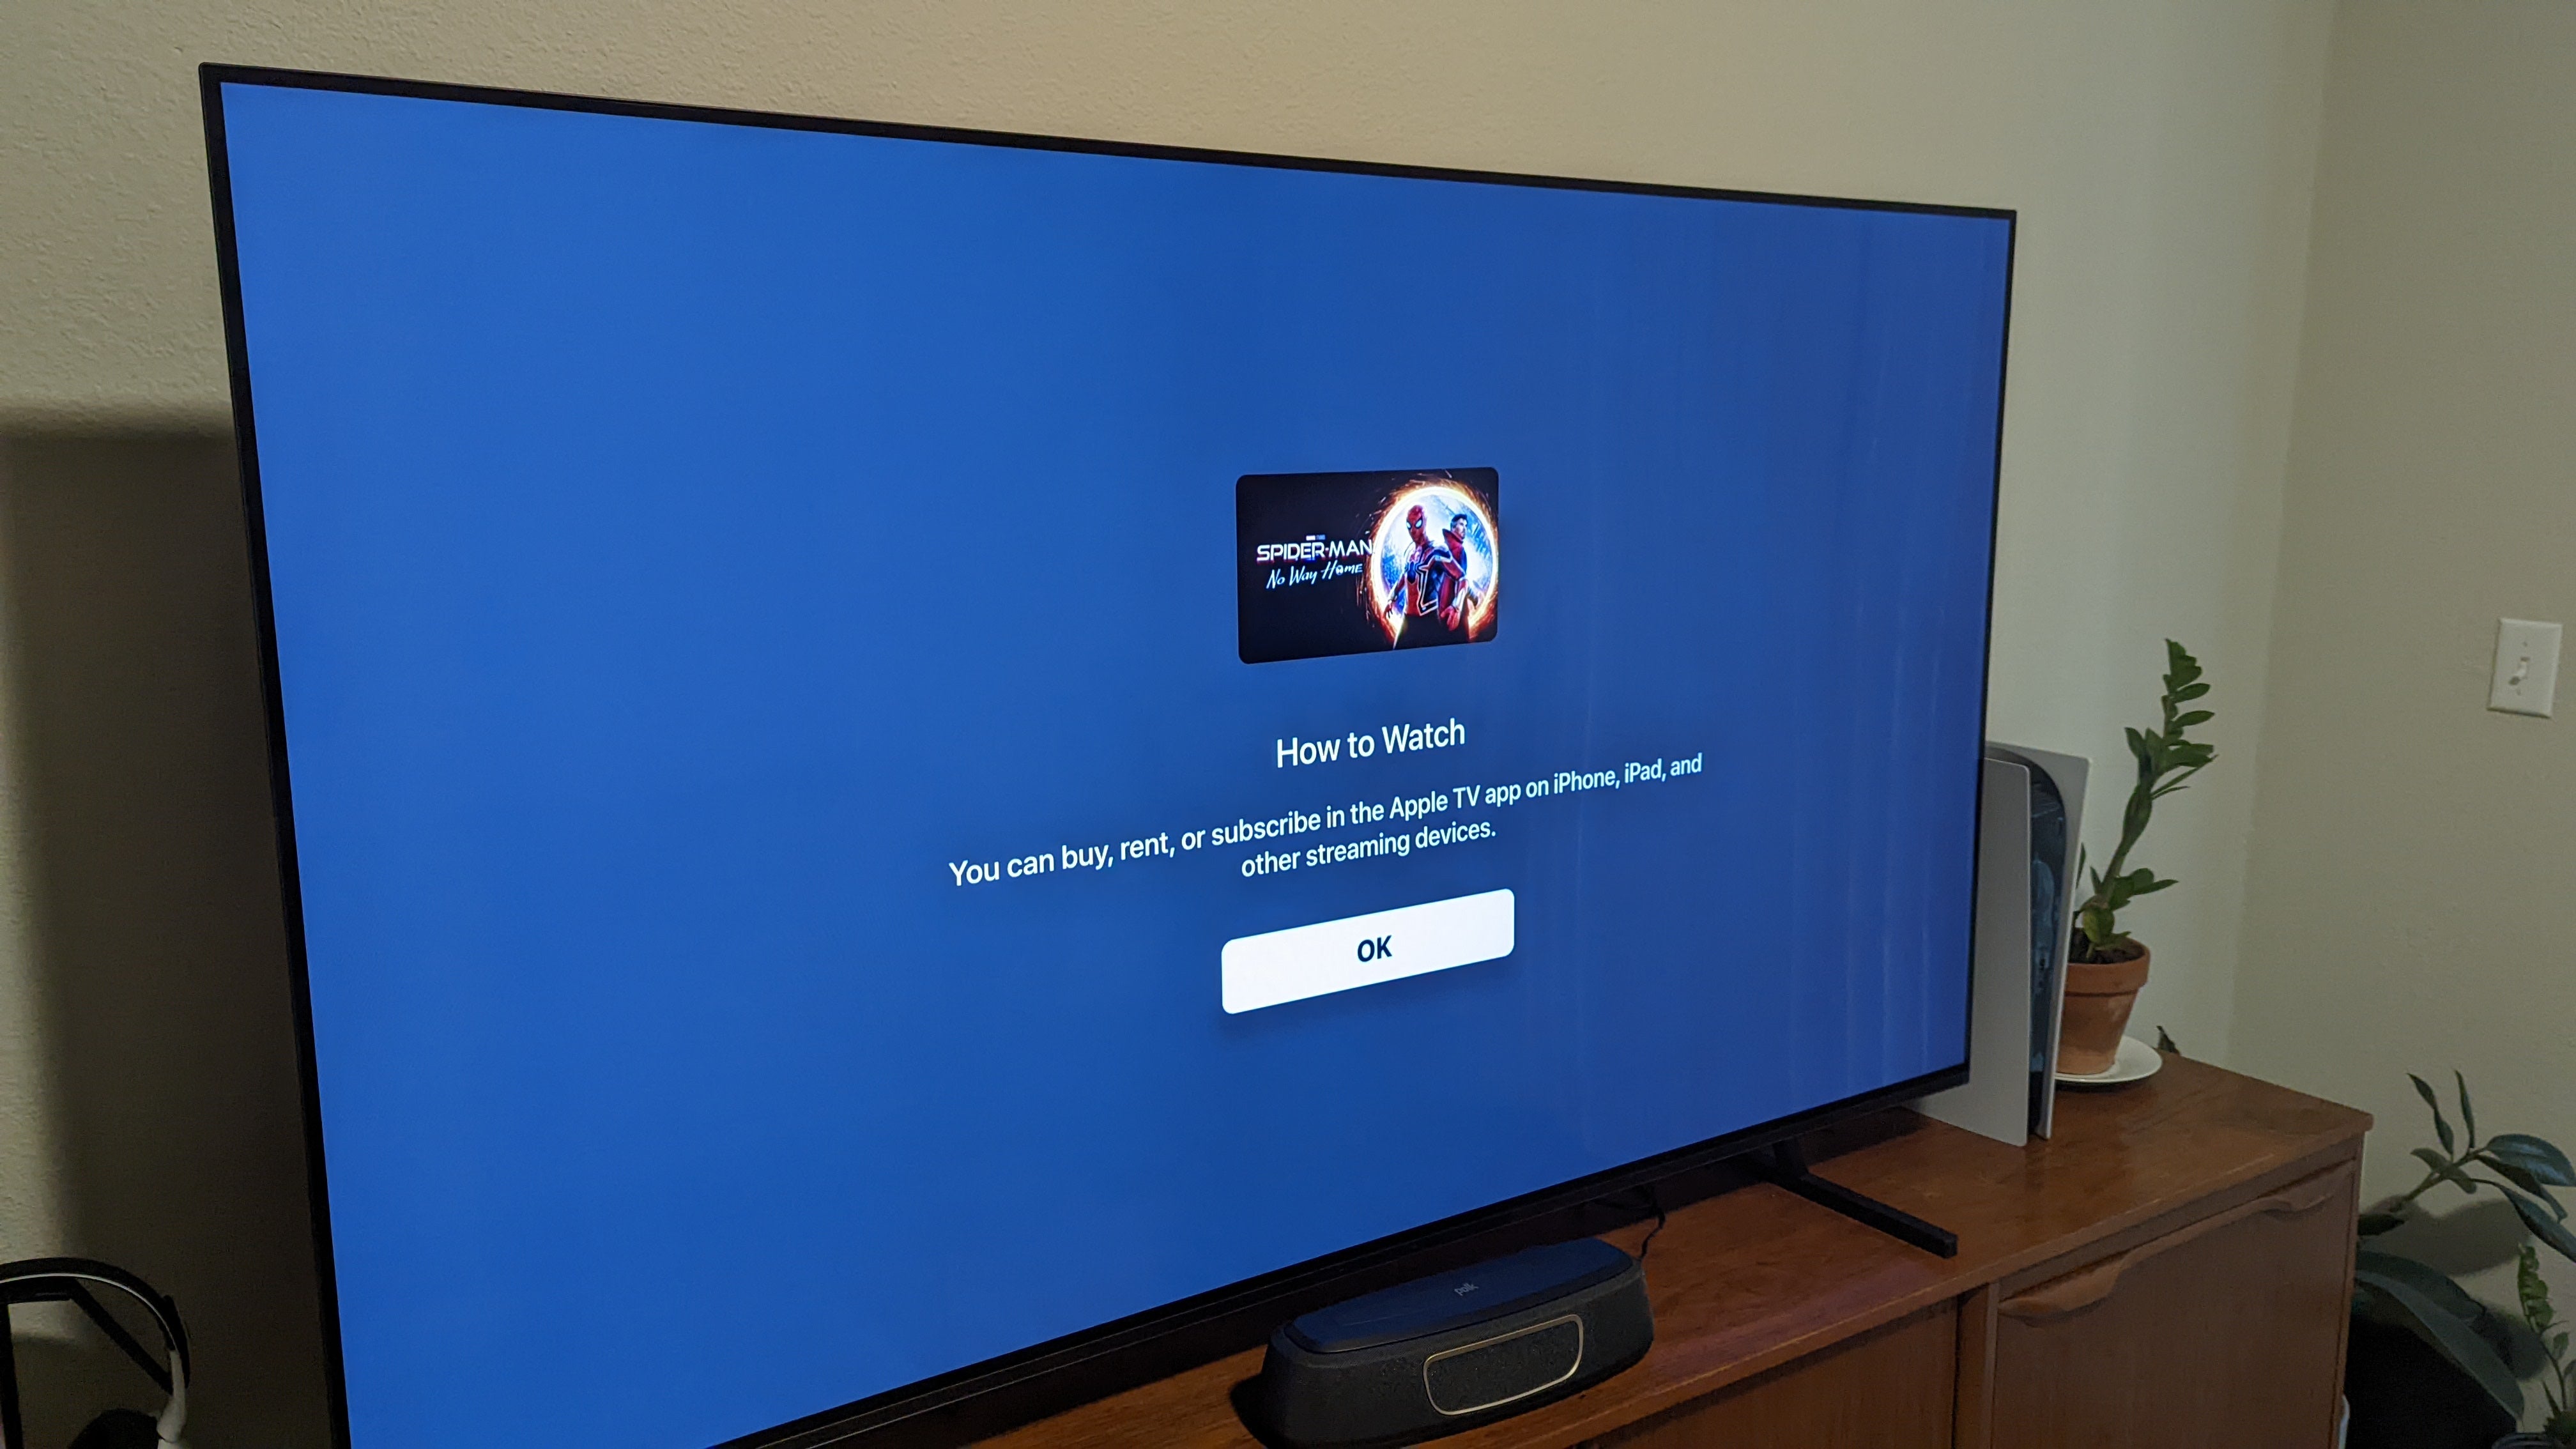 The prompt Apple TV shows when you attempt to rent/purchase a movie on a Google TV. (Photo: Phillip Tracy/Gizmodo)